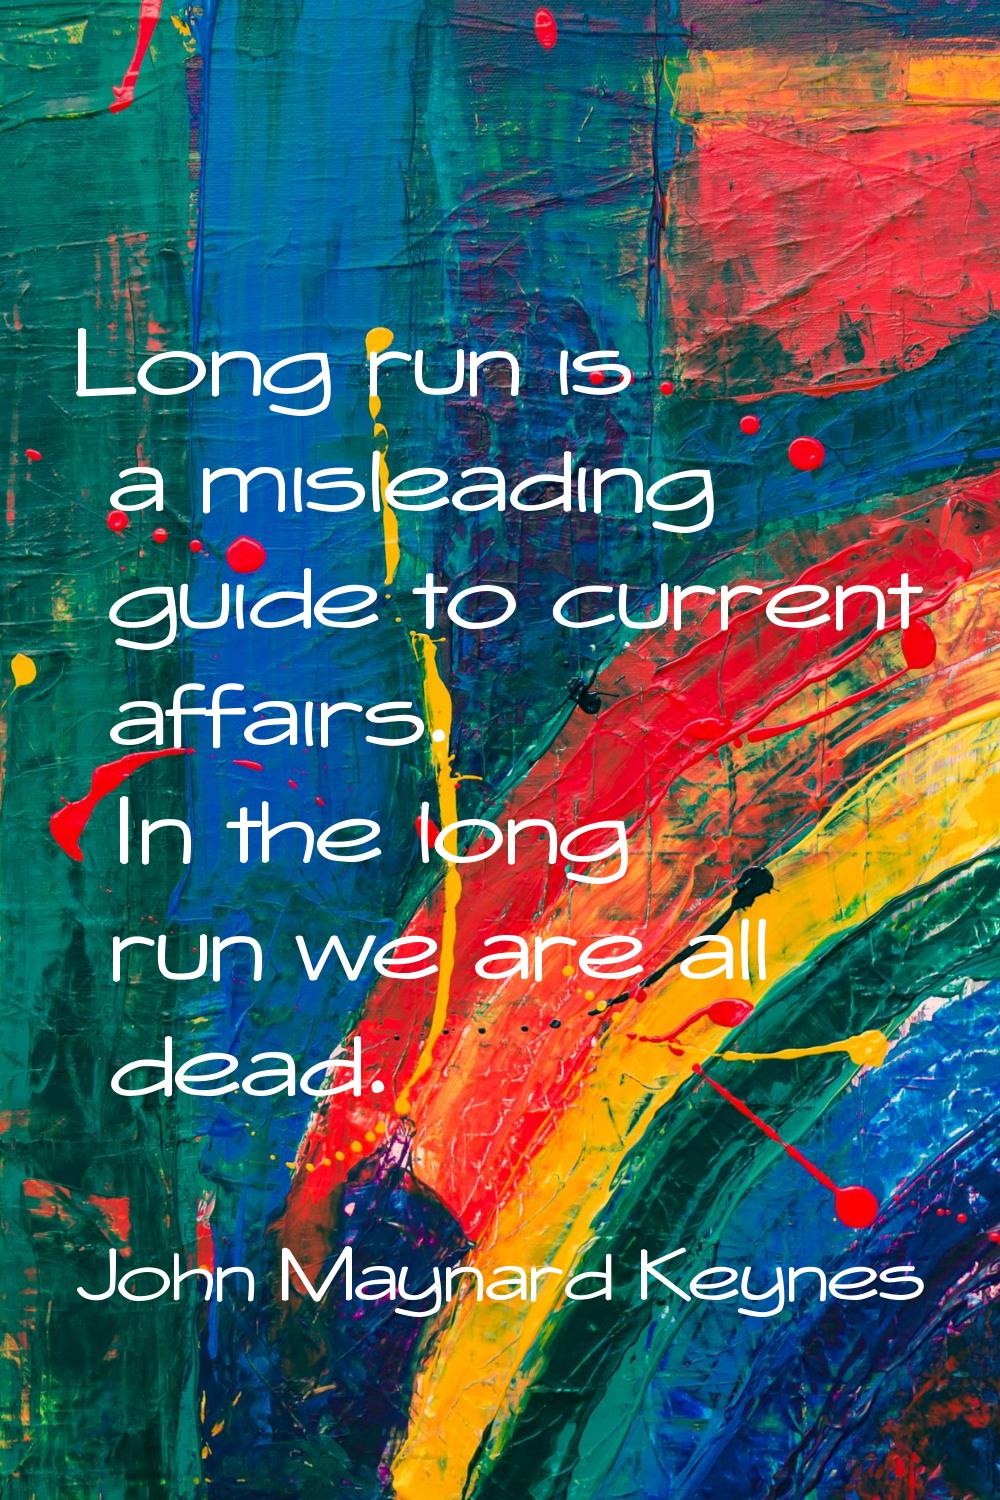 Long run is a misleading guide to current affairs. In the long run we are all dead.